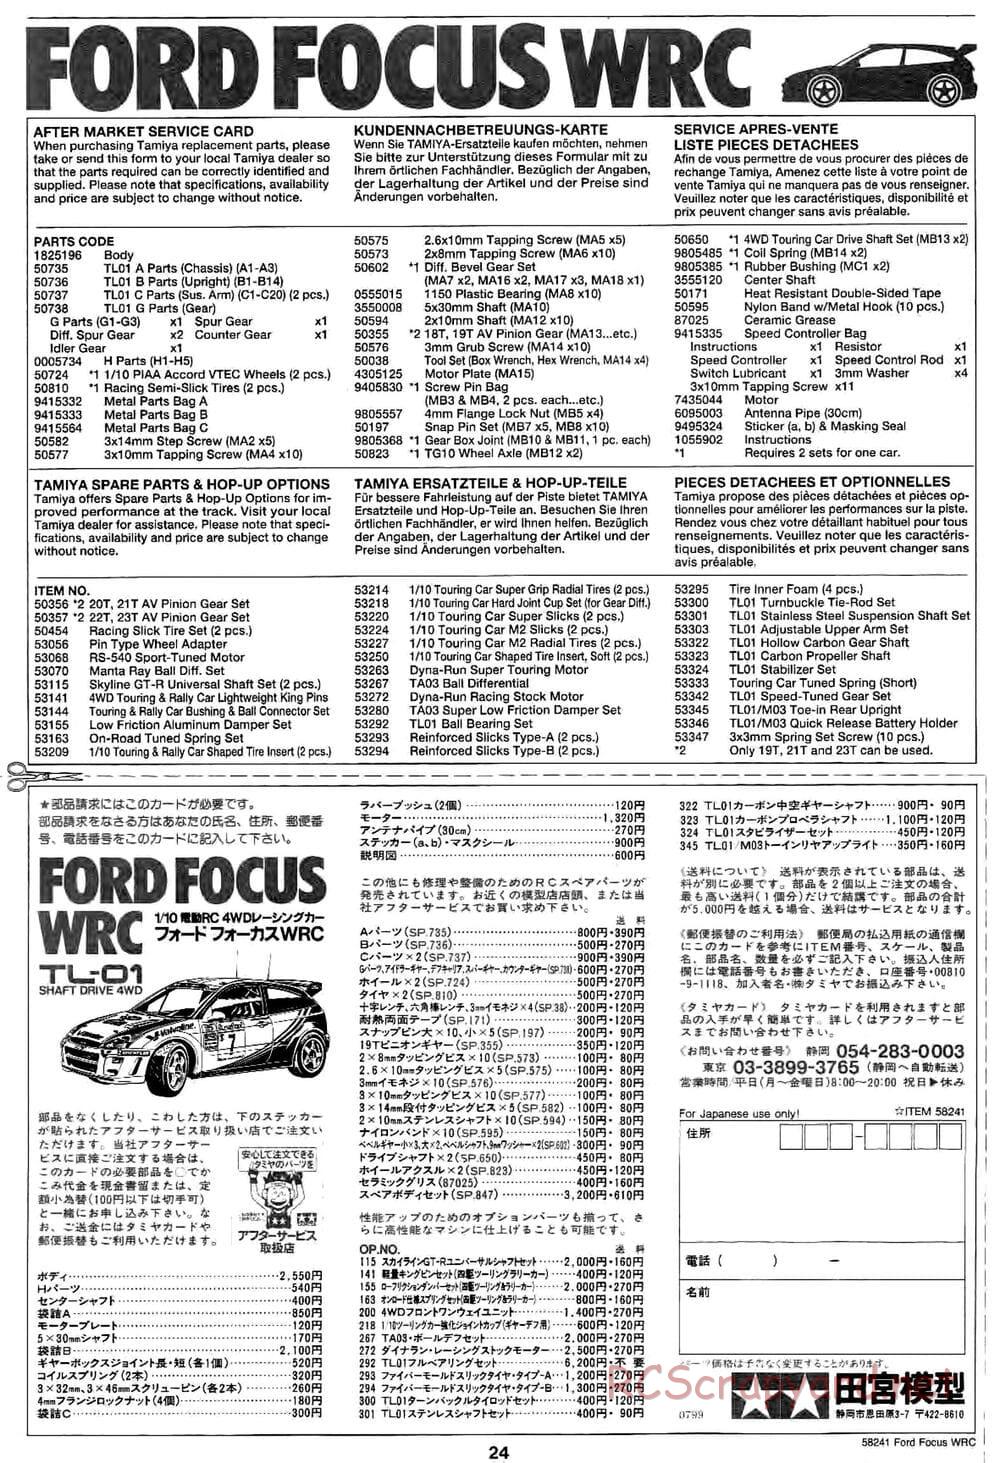 Tamiya - Ford Focus WRC - TL-01 Chassis - Manual - Page 24